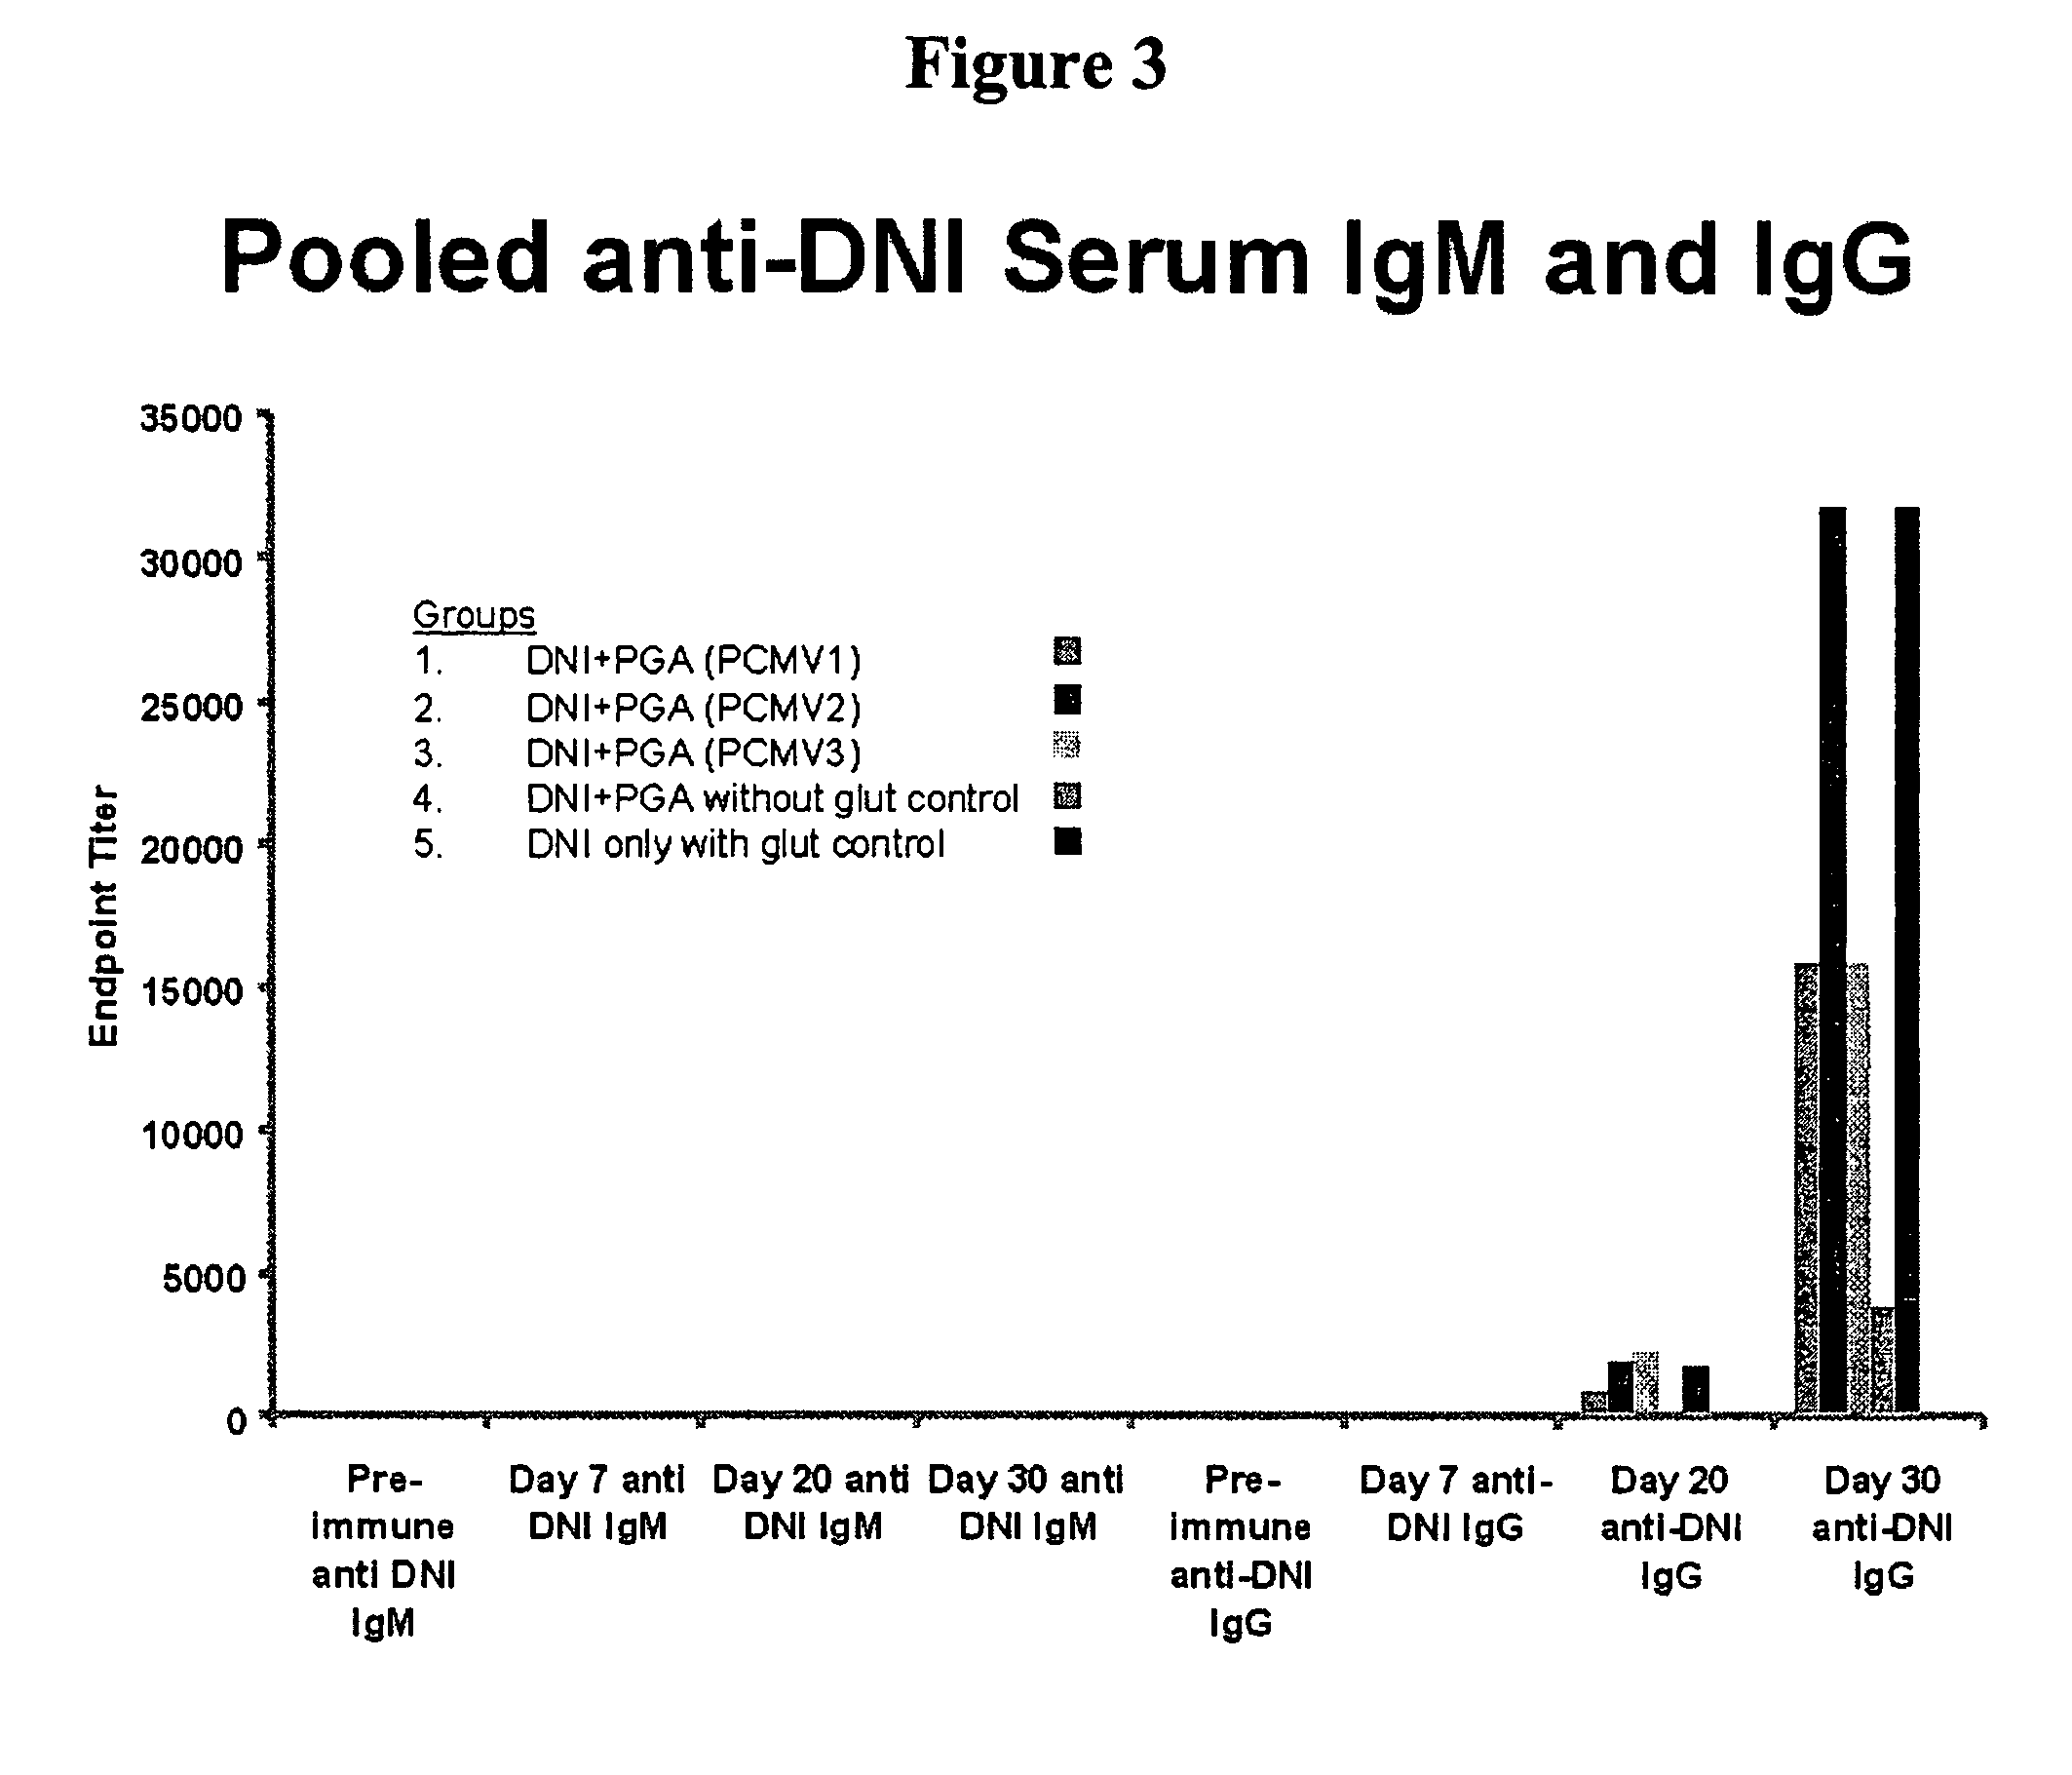 Protein matrix vaccines and methods of making and administering such vaccines